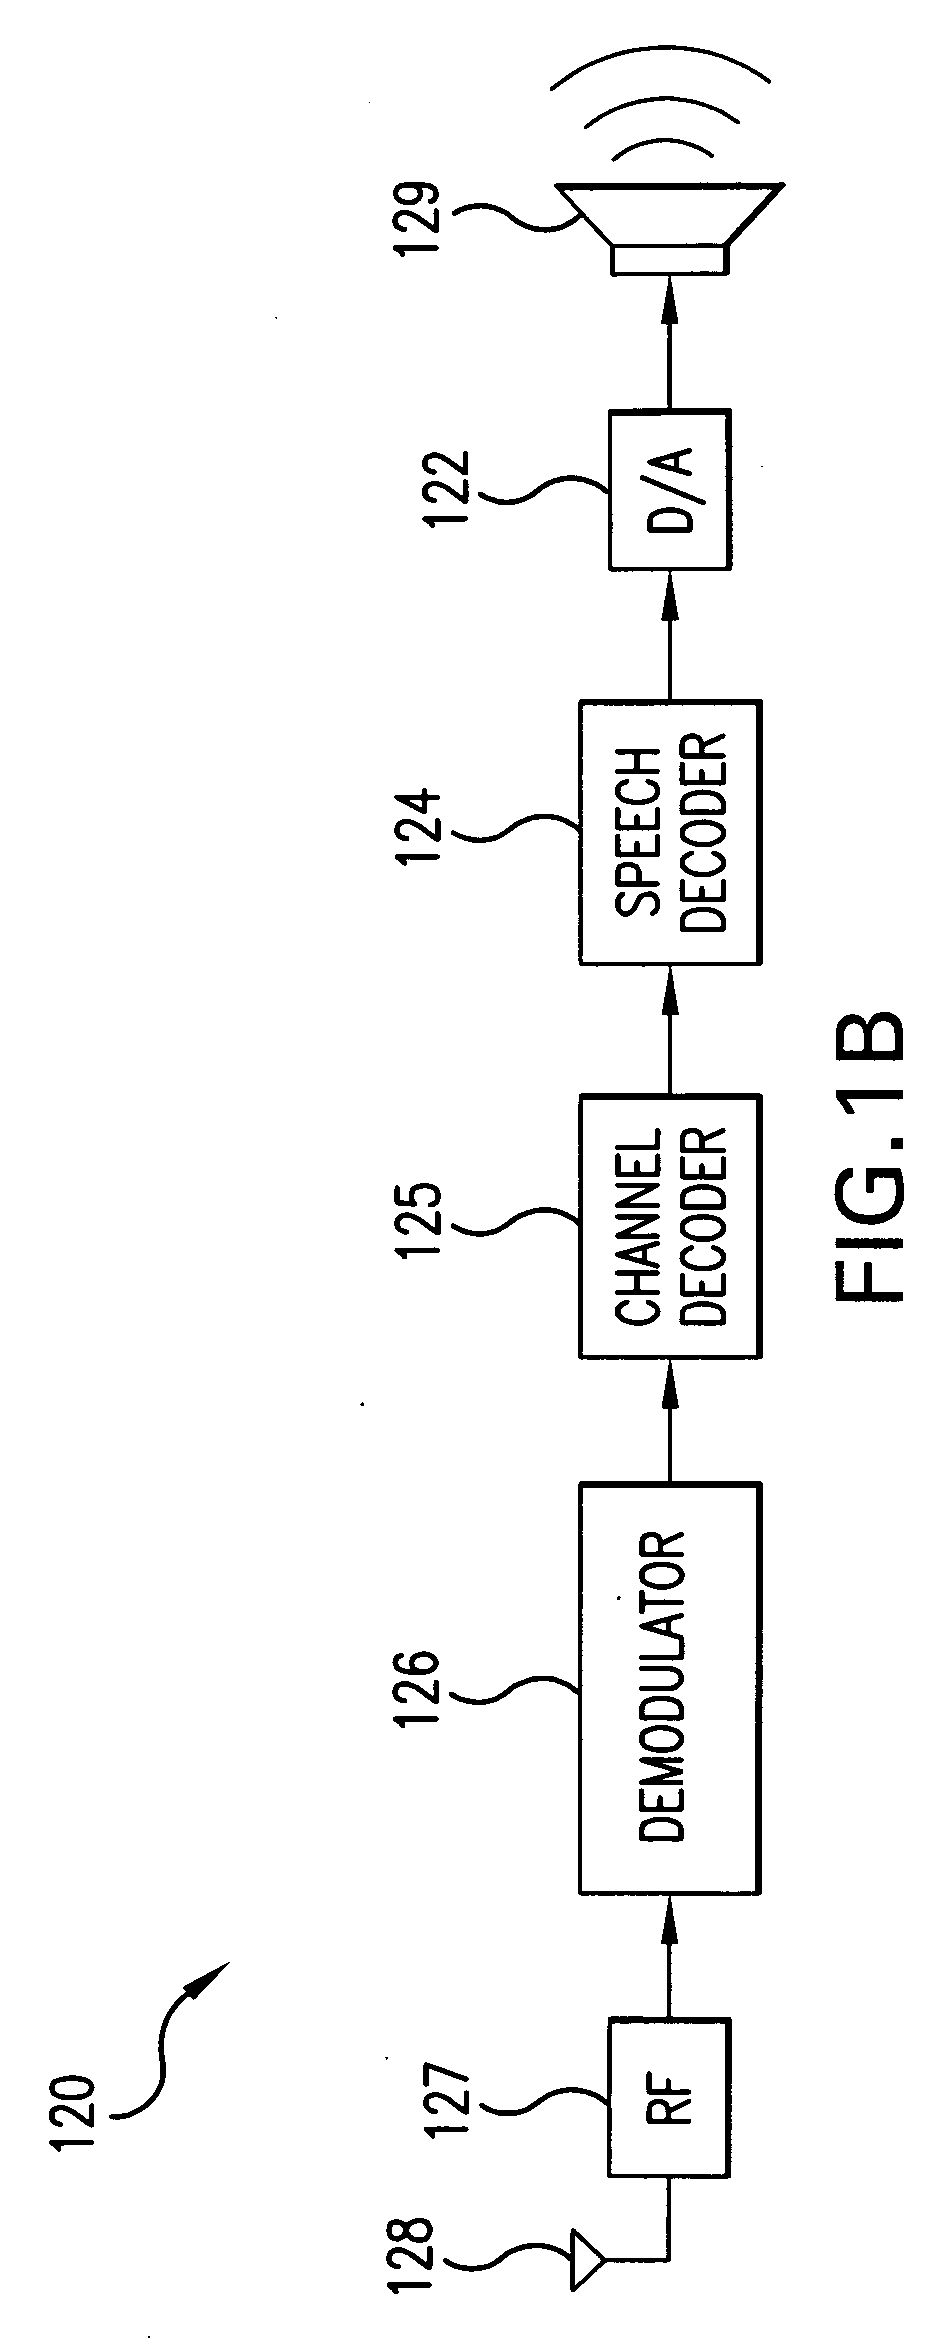 Channel decoding for wireless telephones with multiple microphones and multiple description transmission